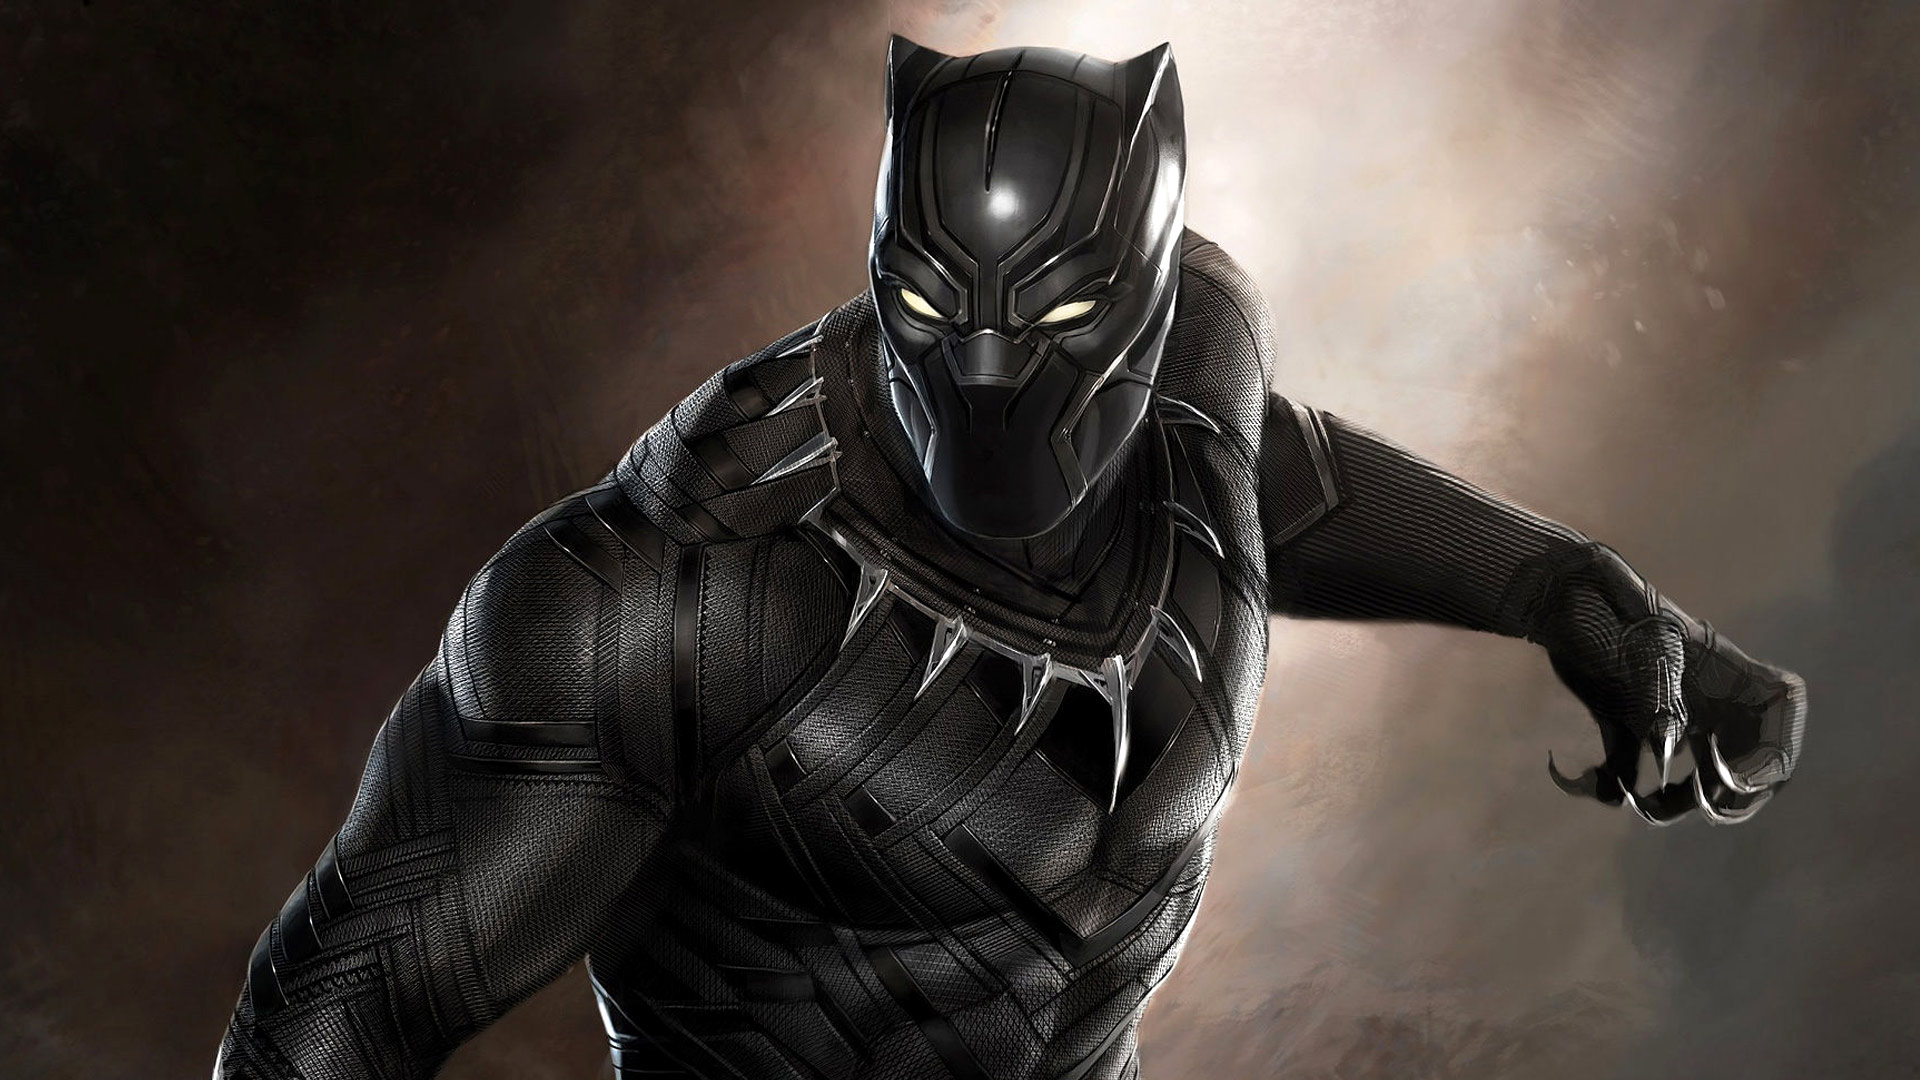 Download Black Panther Wallpaper For iOS 1920x1080